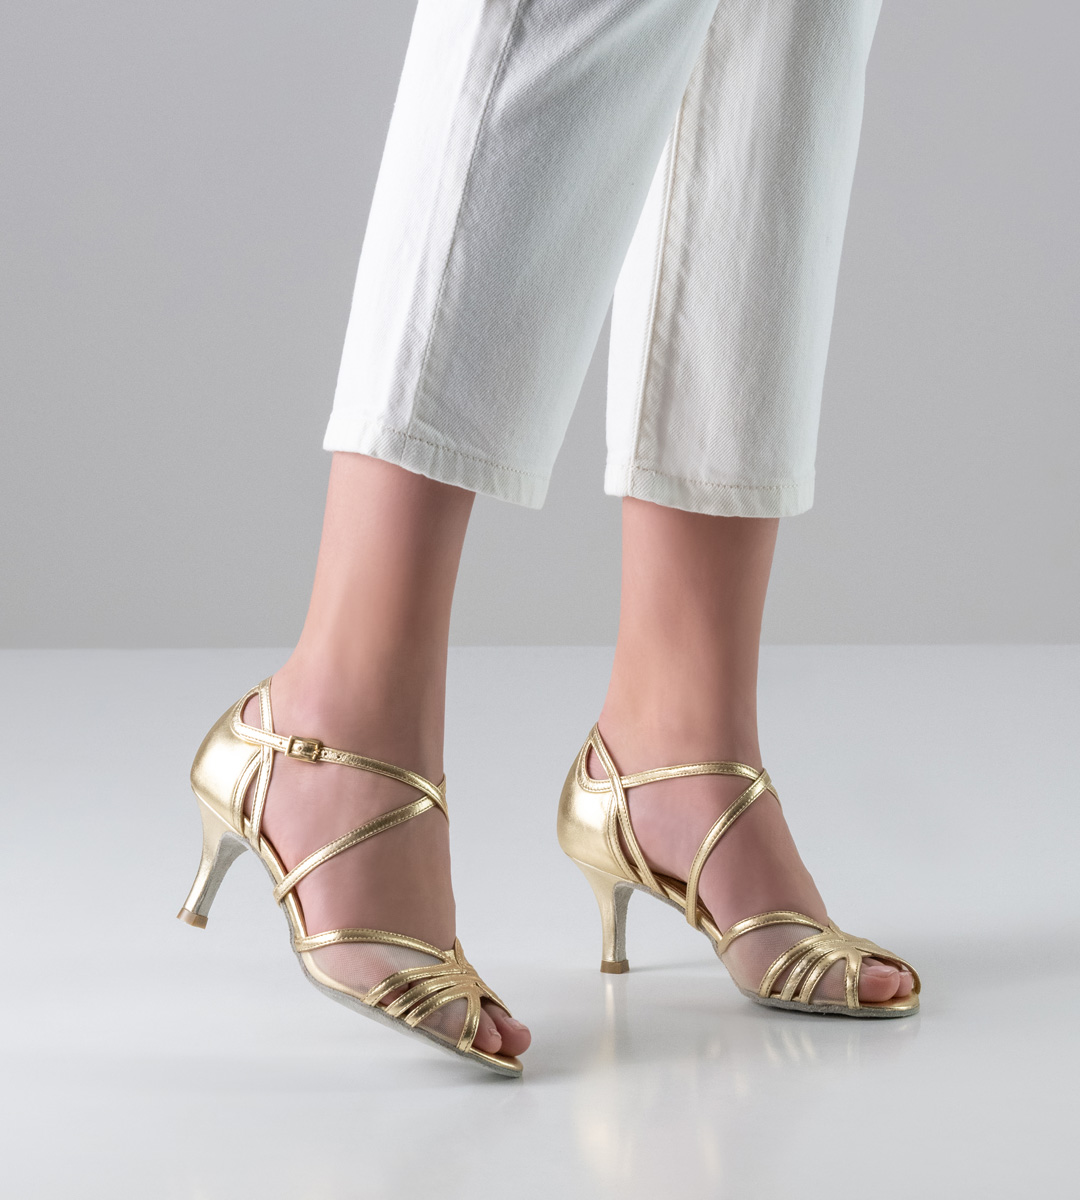 White trousers in combination with platinum-coloured Nueva Epoca ladies' dance shoes